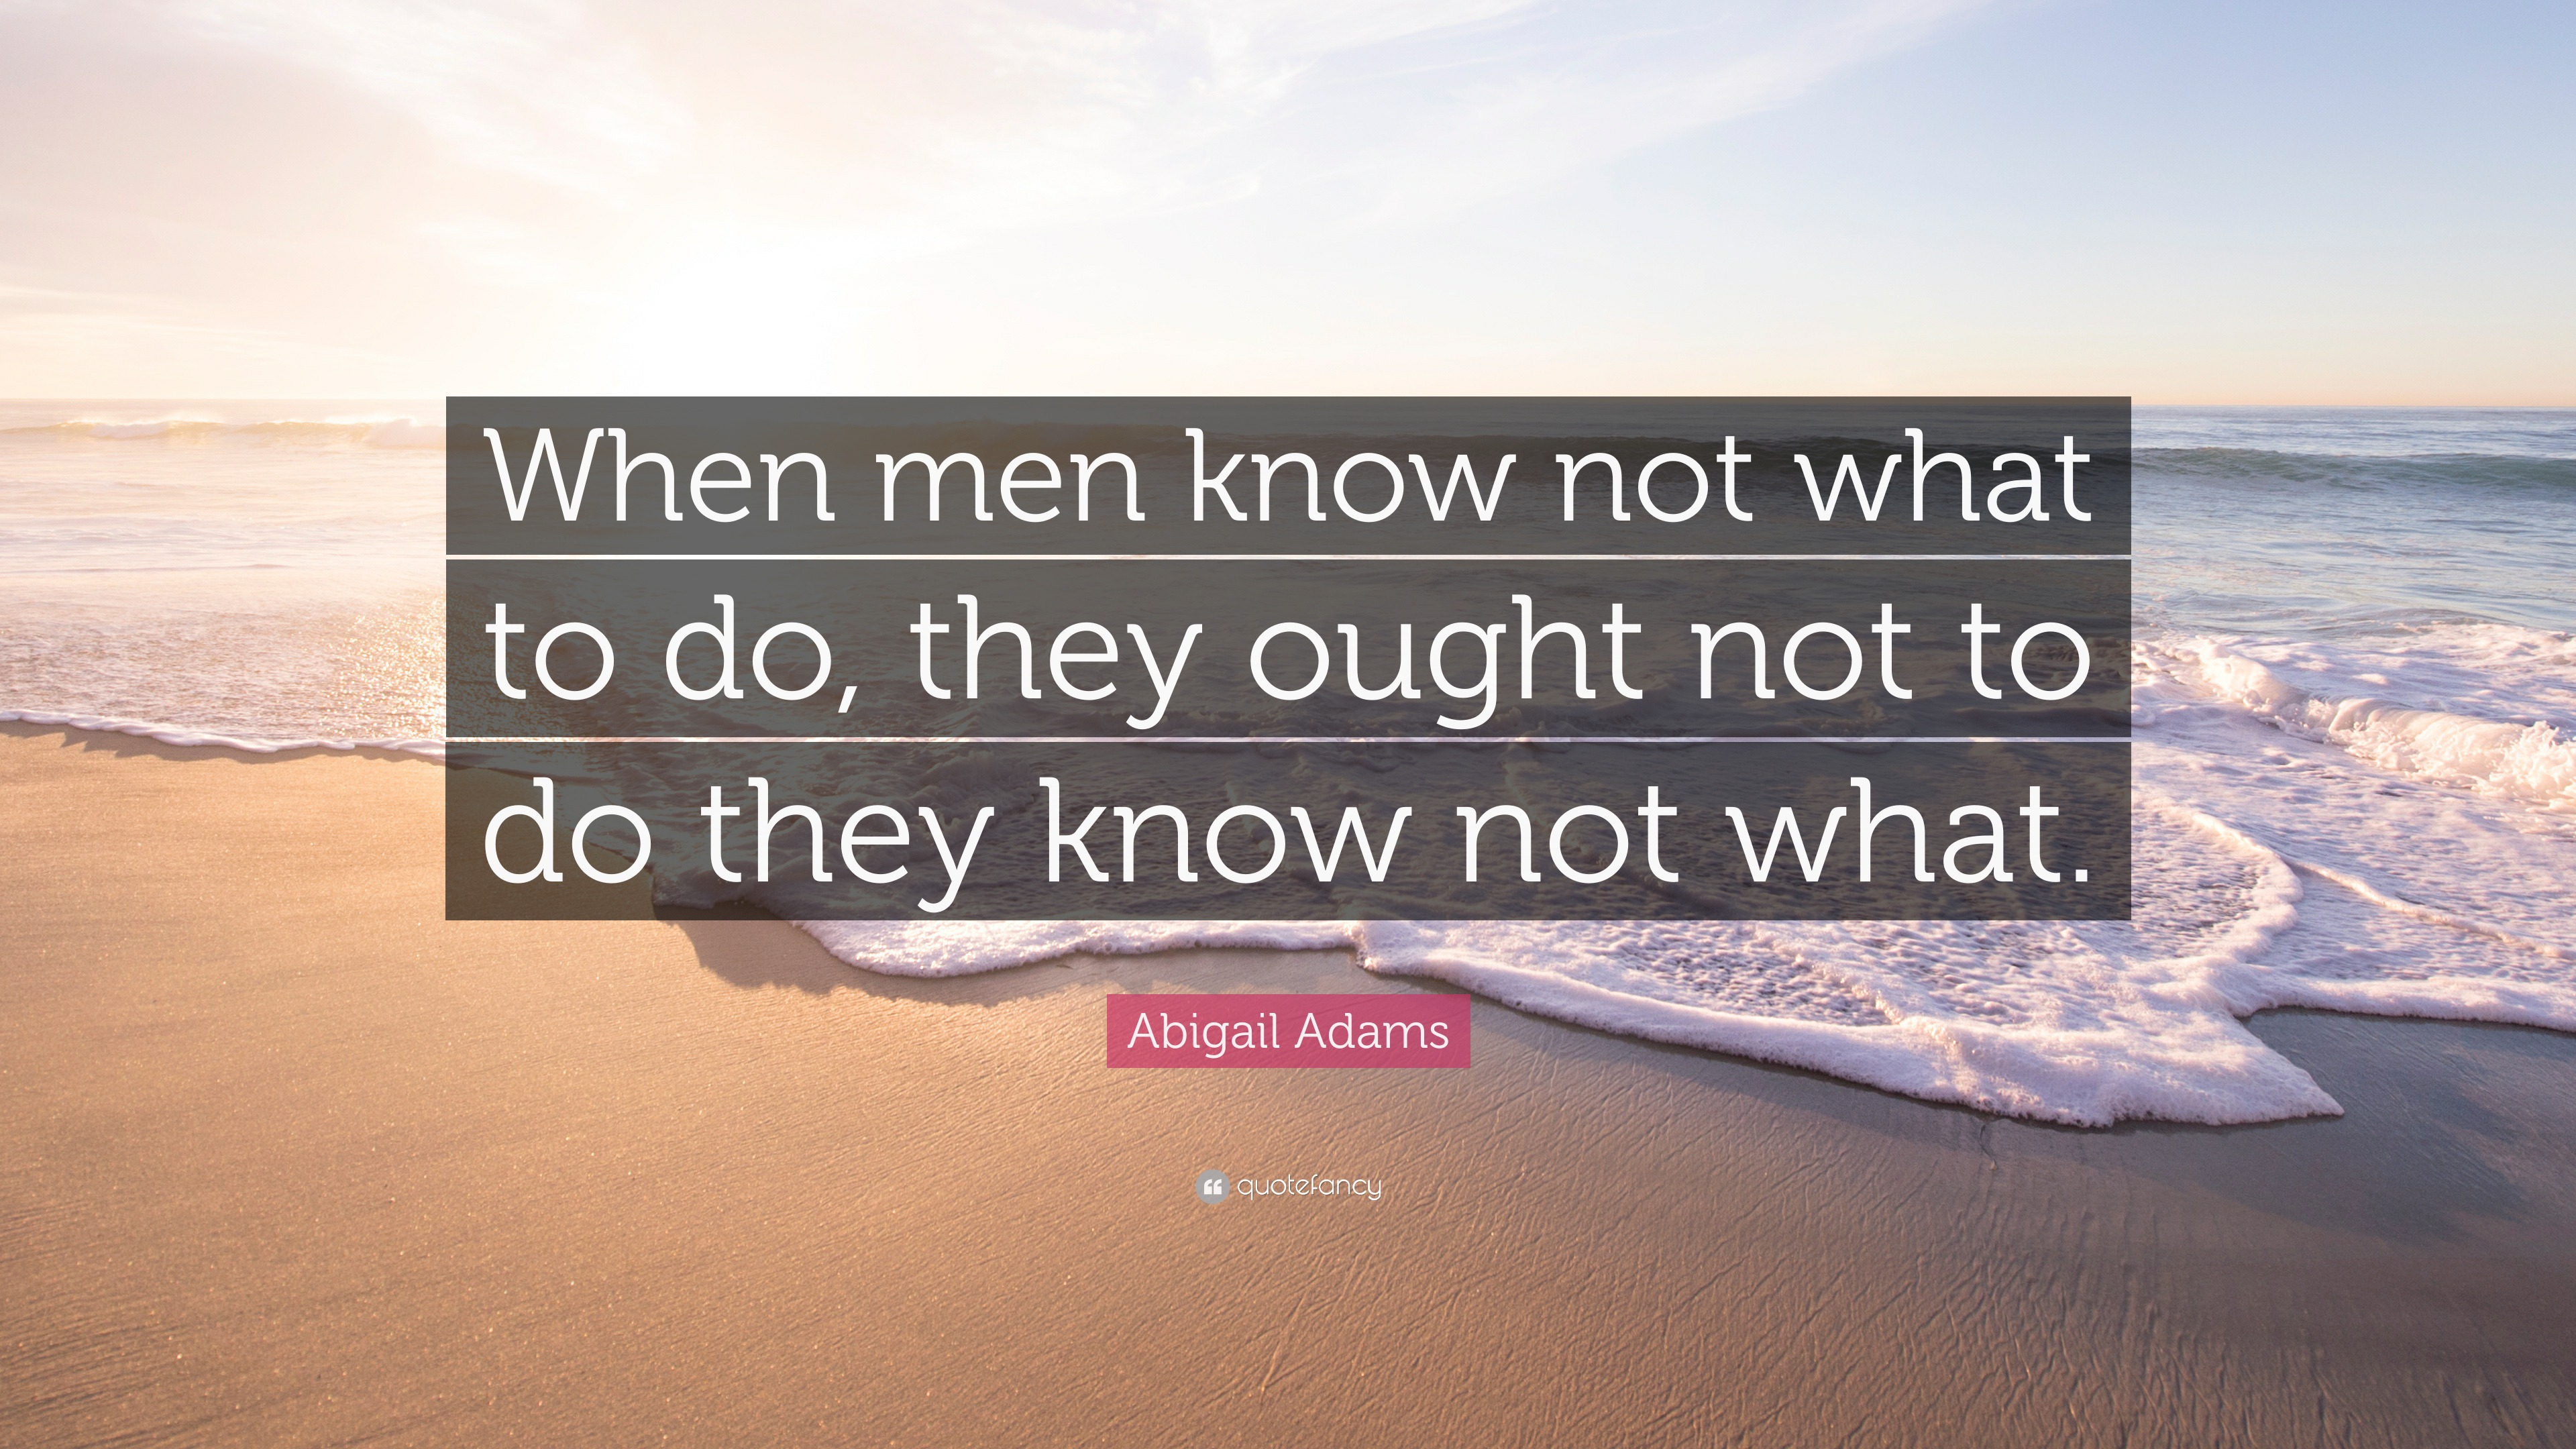 Abigail Adams Quote “when Men Know Not What To Do They Ought Not To Do They Know Not What ”